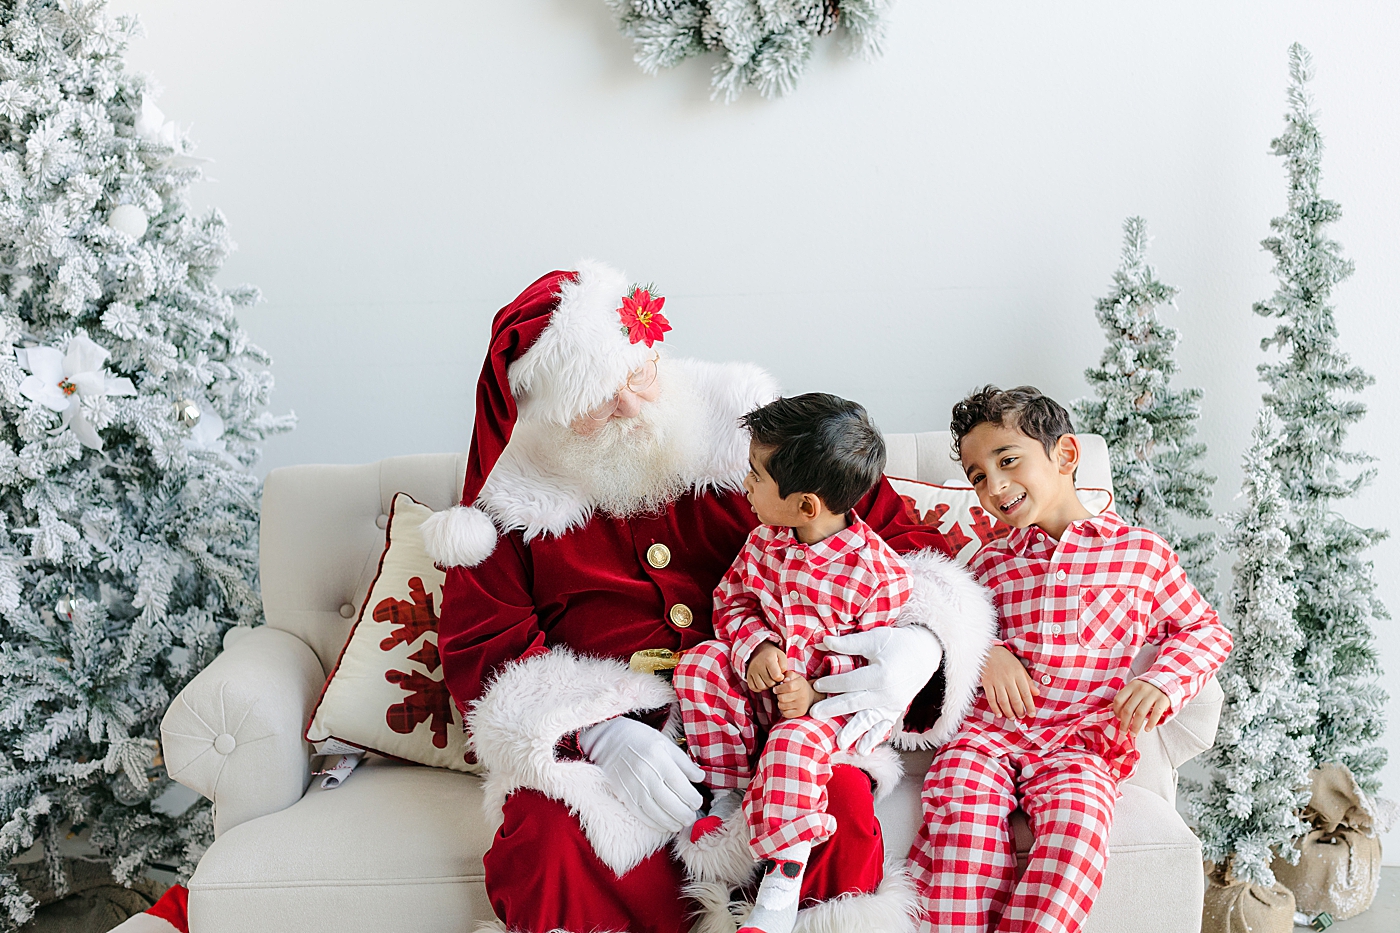 Brothers in red and white pajamas sitting with Santa | Images by Sana Ahmed Photography